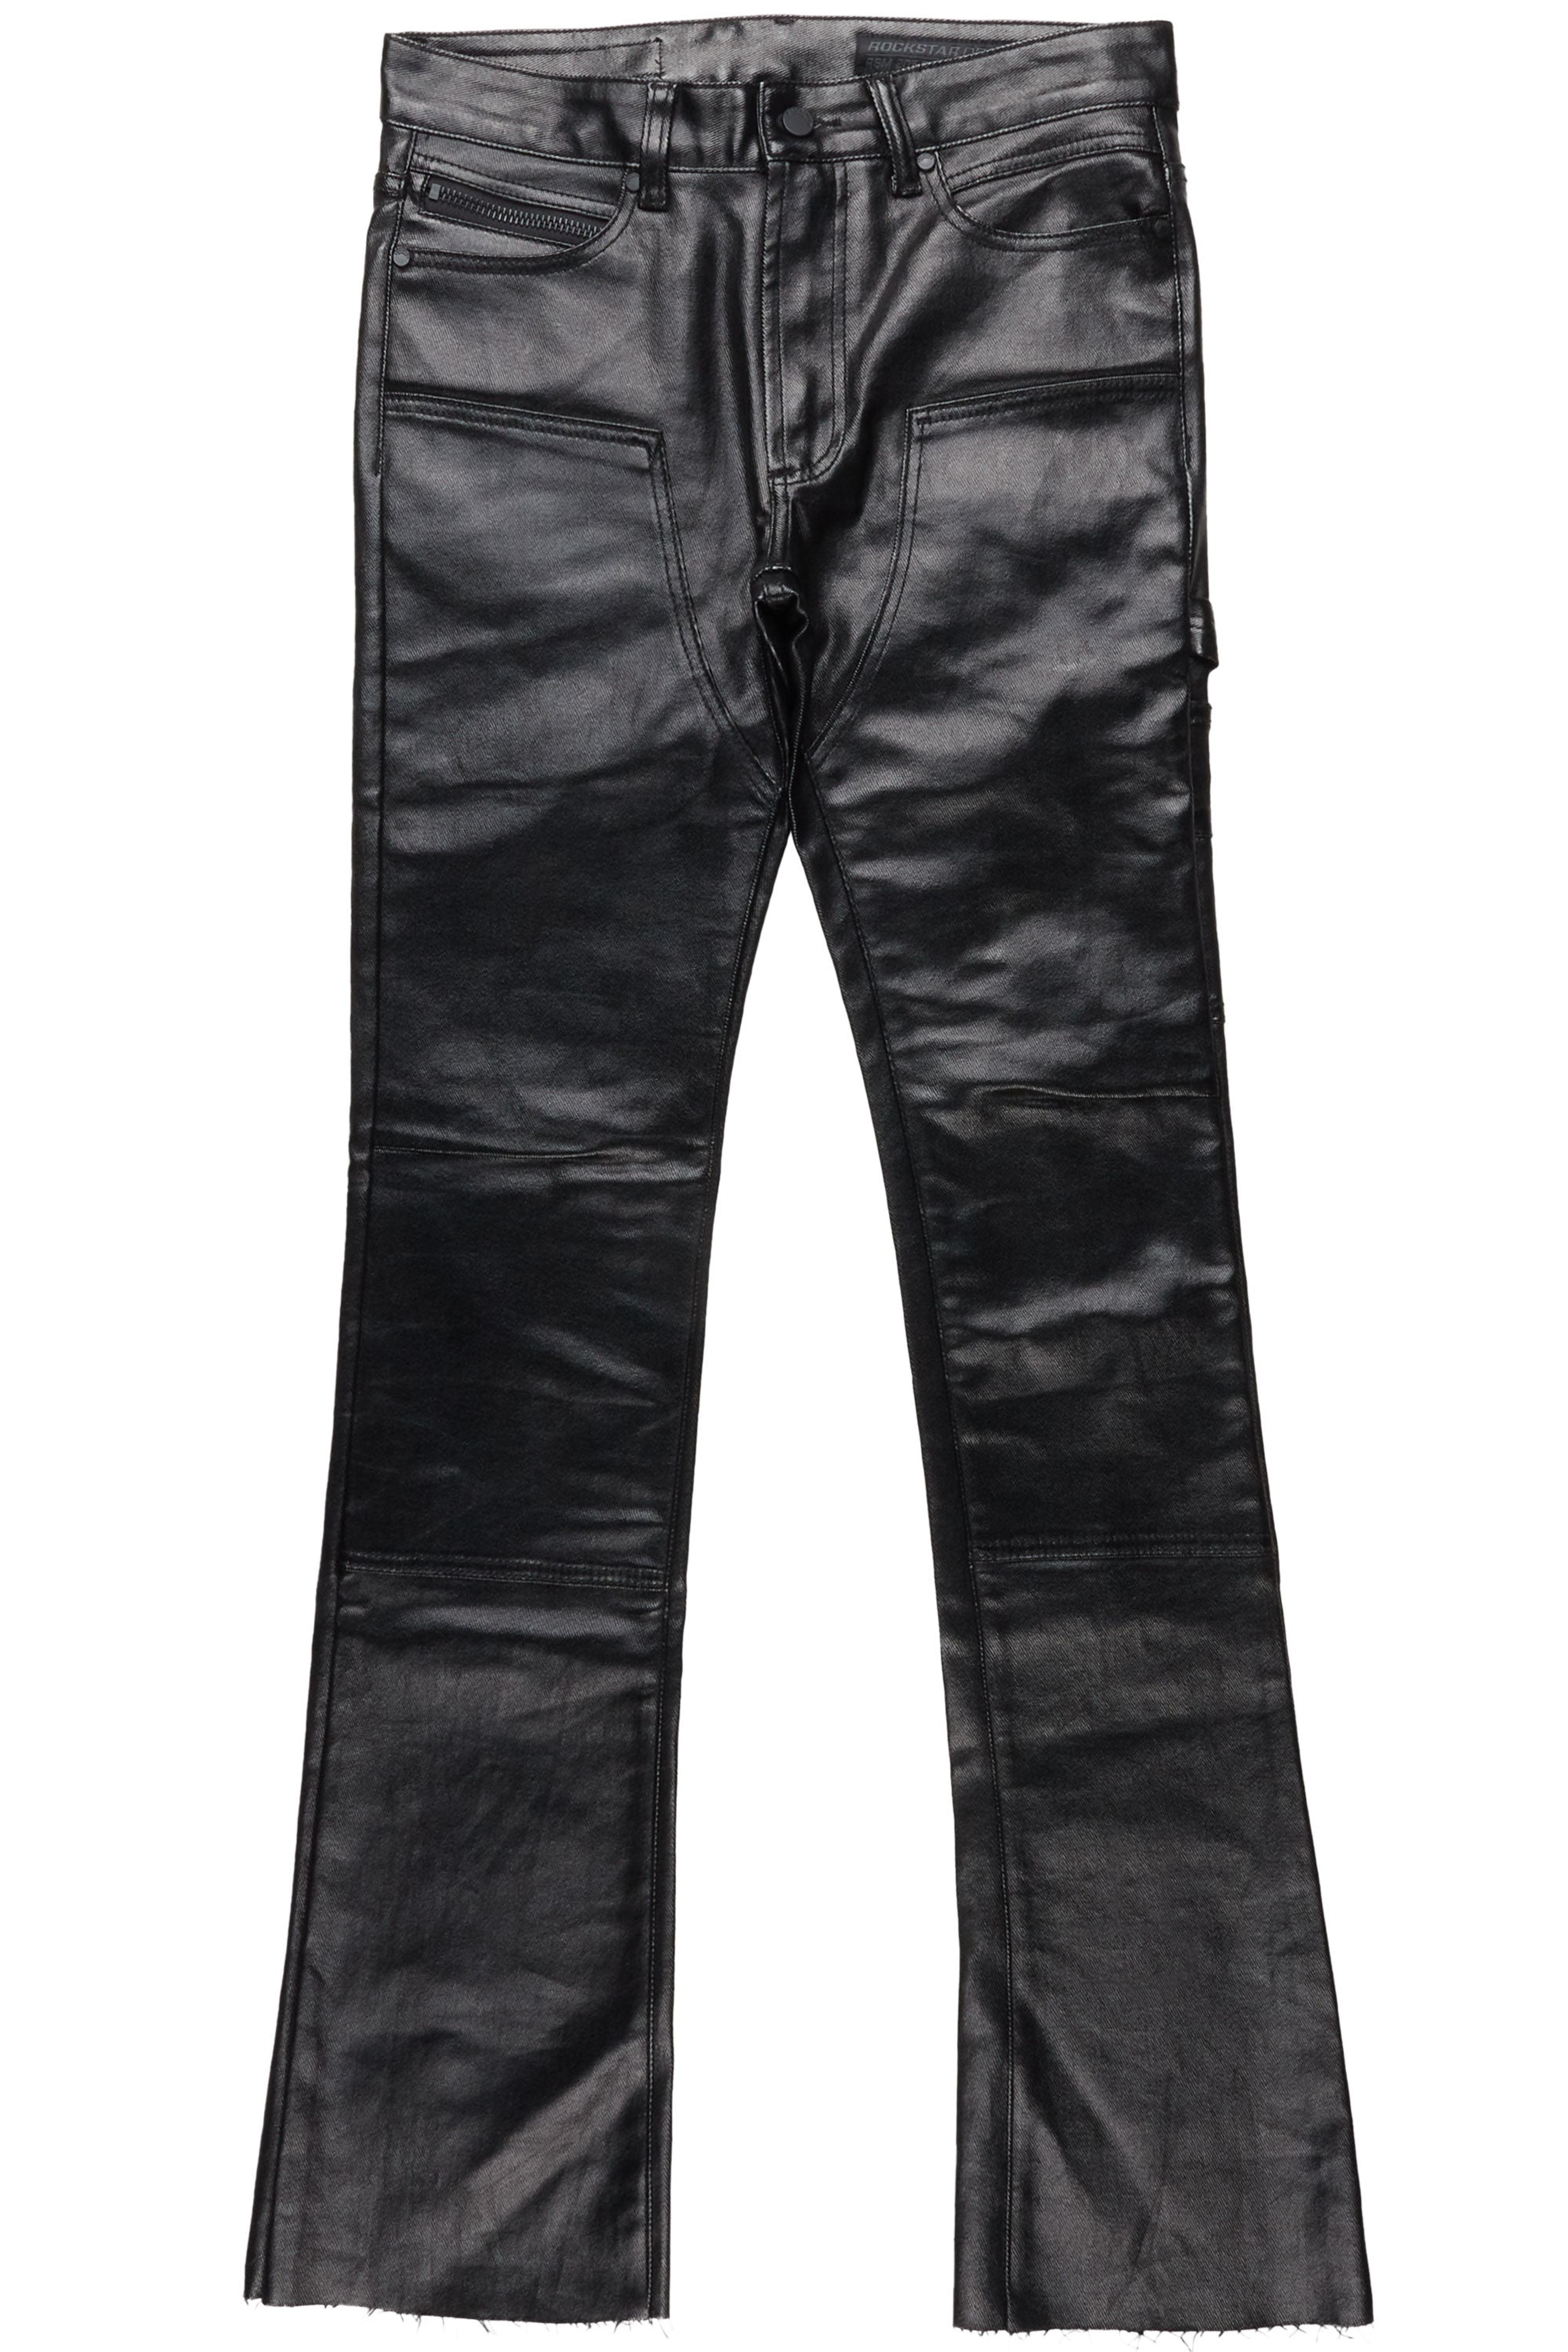 Alternate View 1 of Quartz Black Leather Stacked Flare Jean